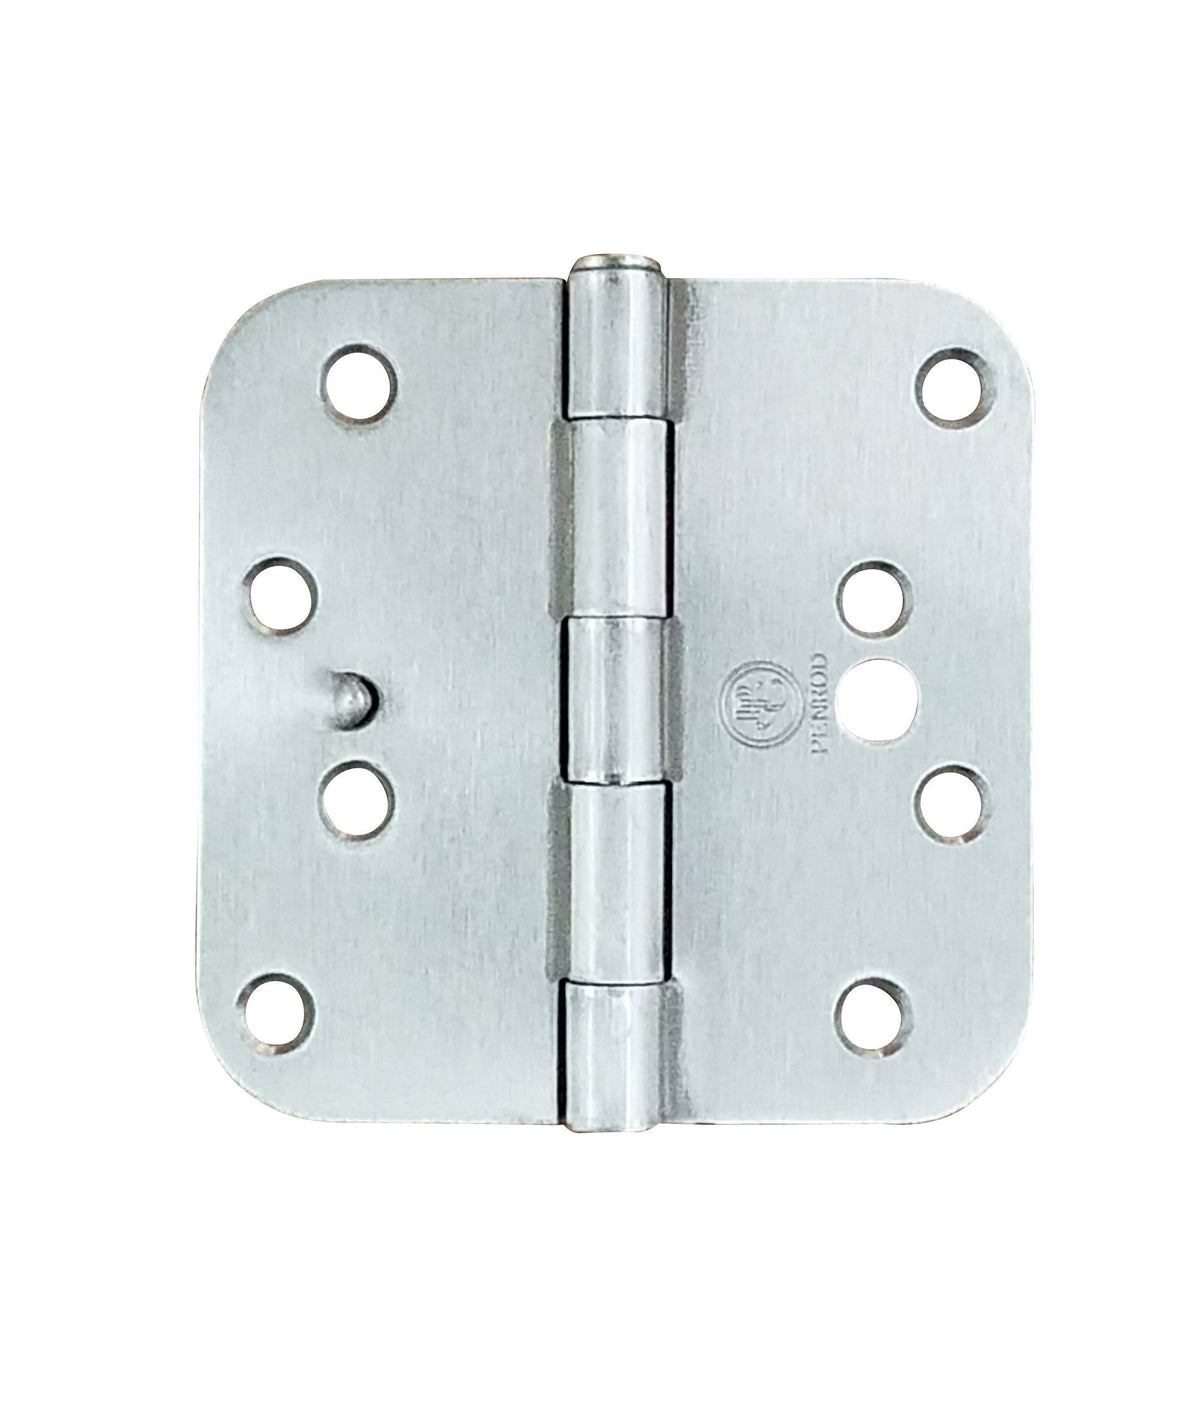 Satin Nickel Hinges With Security Tab - 4" Inch With 5/8" Inch Radius Corners - 3 Pack